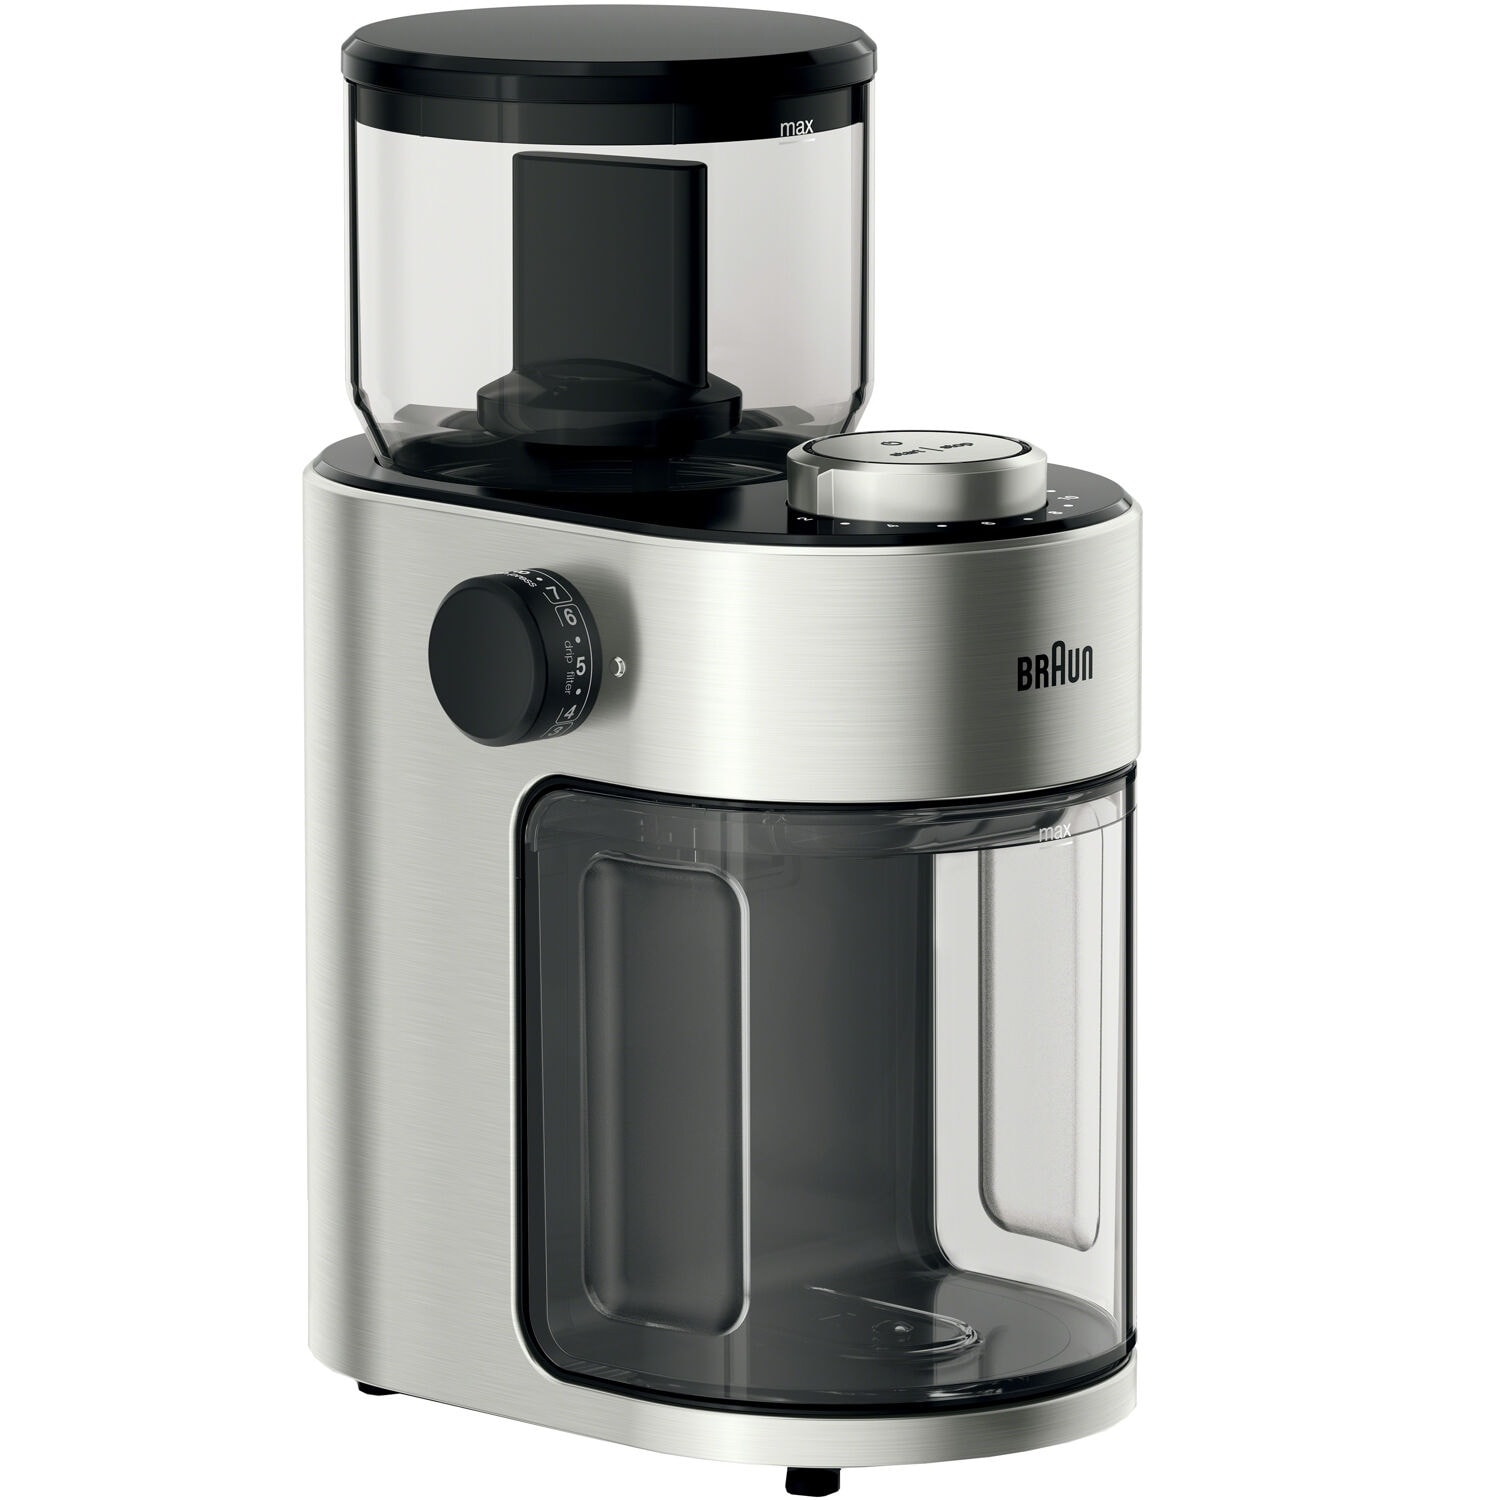 https://ak1.ostkcdn.com/images/products/is/images/direct/742a9786efc758b967f5787bcef2a5bb40b18ae2/Braun-FreshSet-12-Cup-Burr-Coffee-Grinder-in-Stainless-Steel-Black.jpg